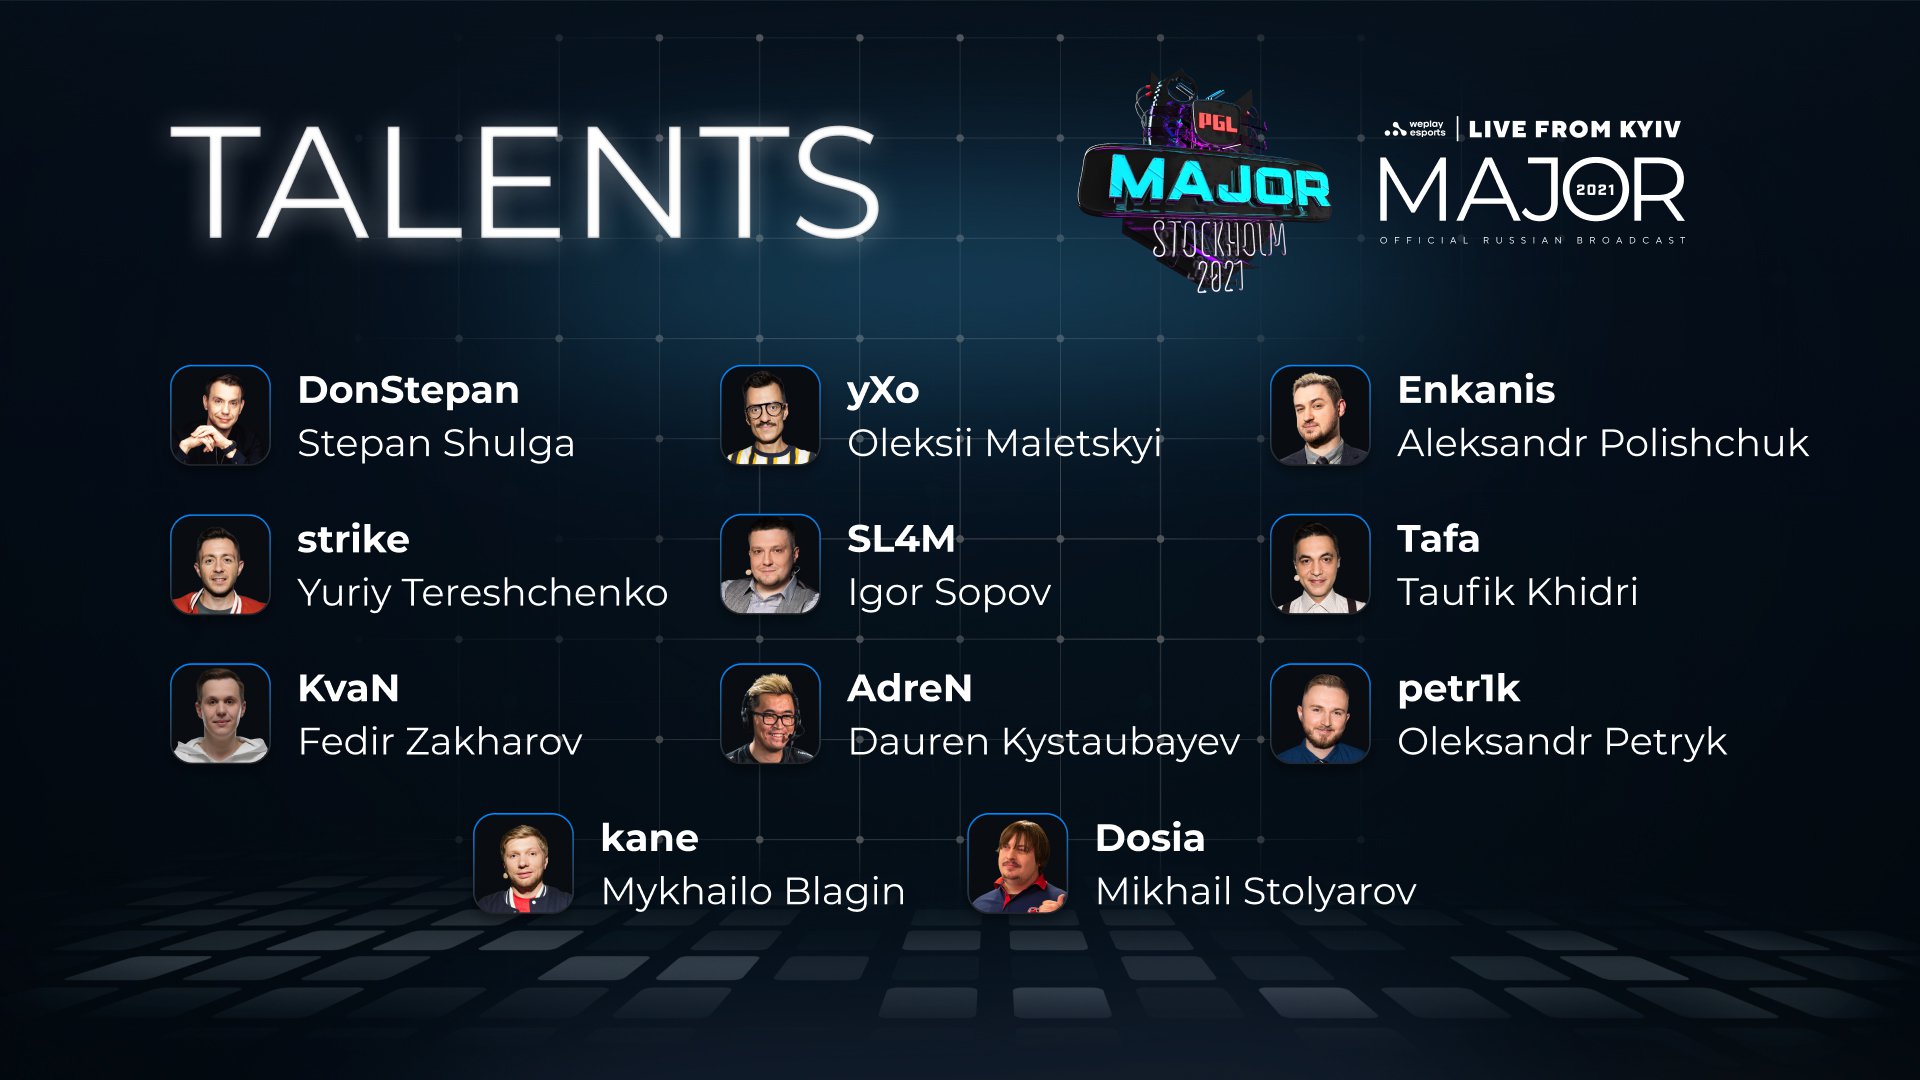 Talents of the Russian-language broadcast of the PGL Major Stockholm 2021. Image: WePlay Holding